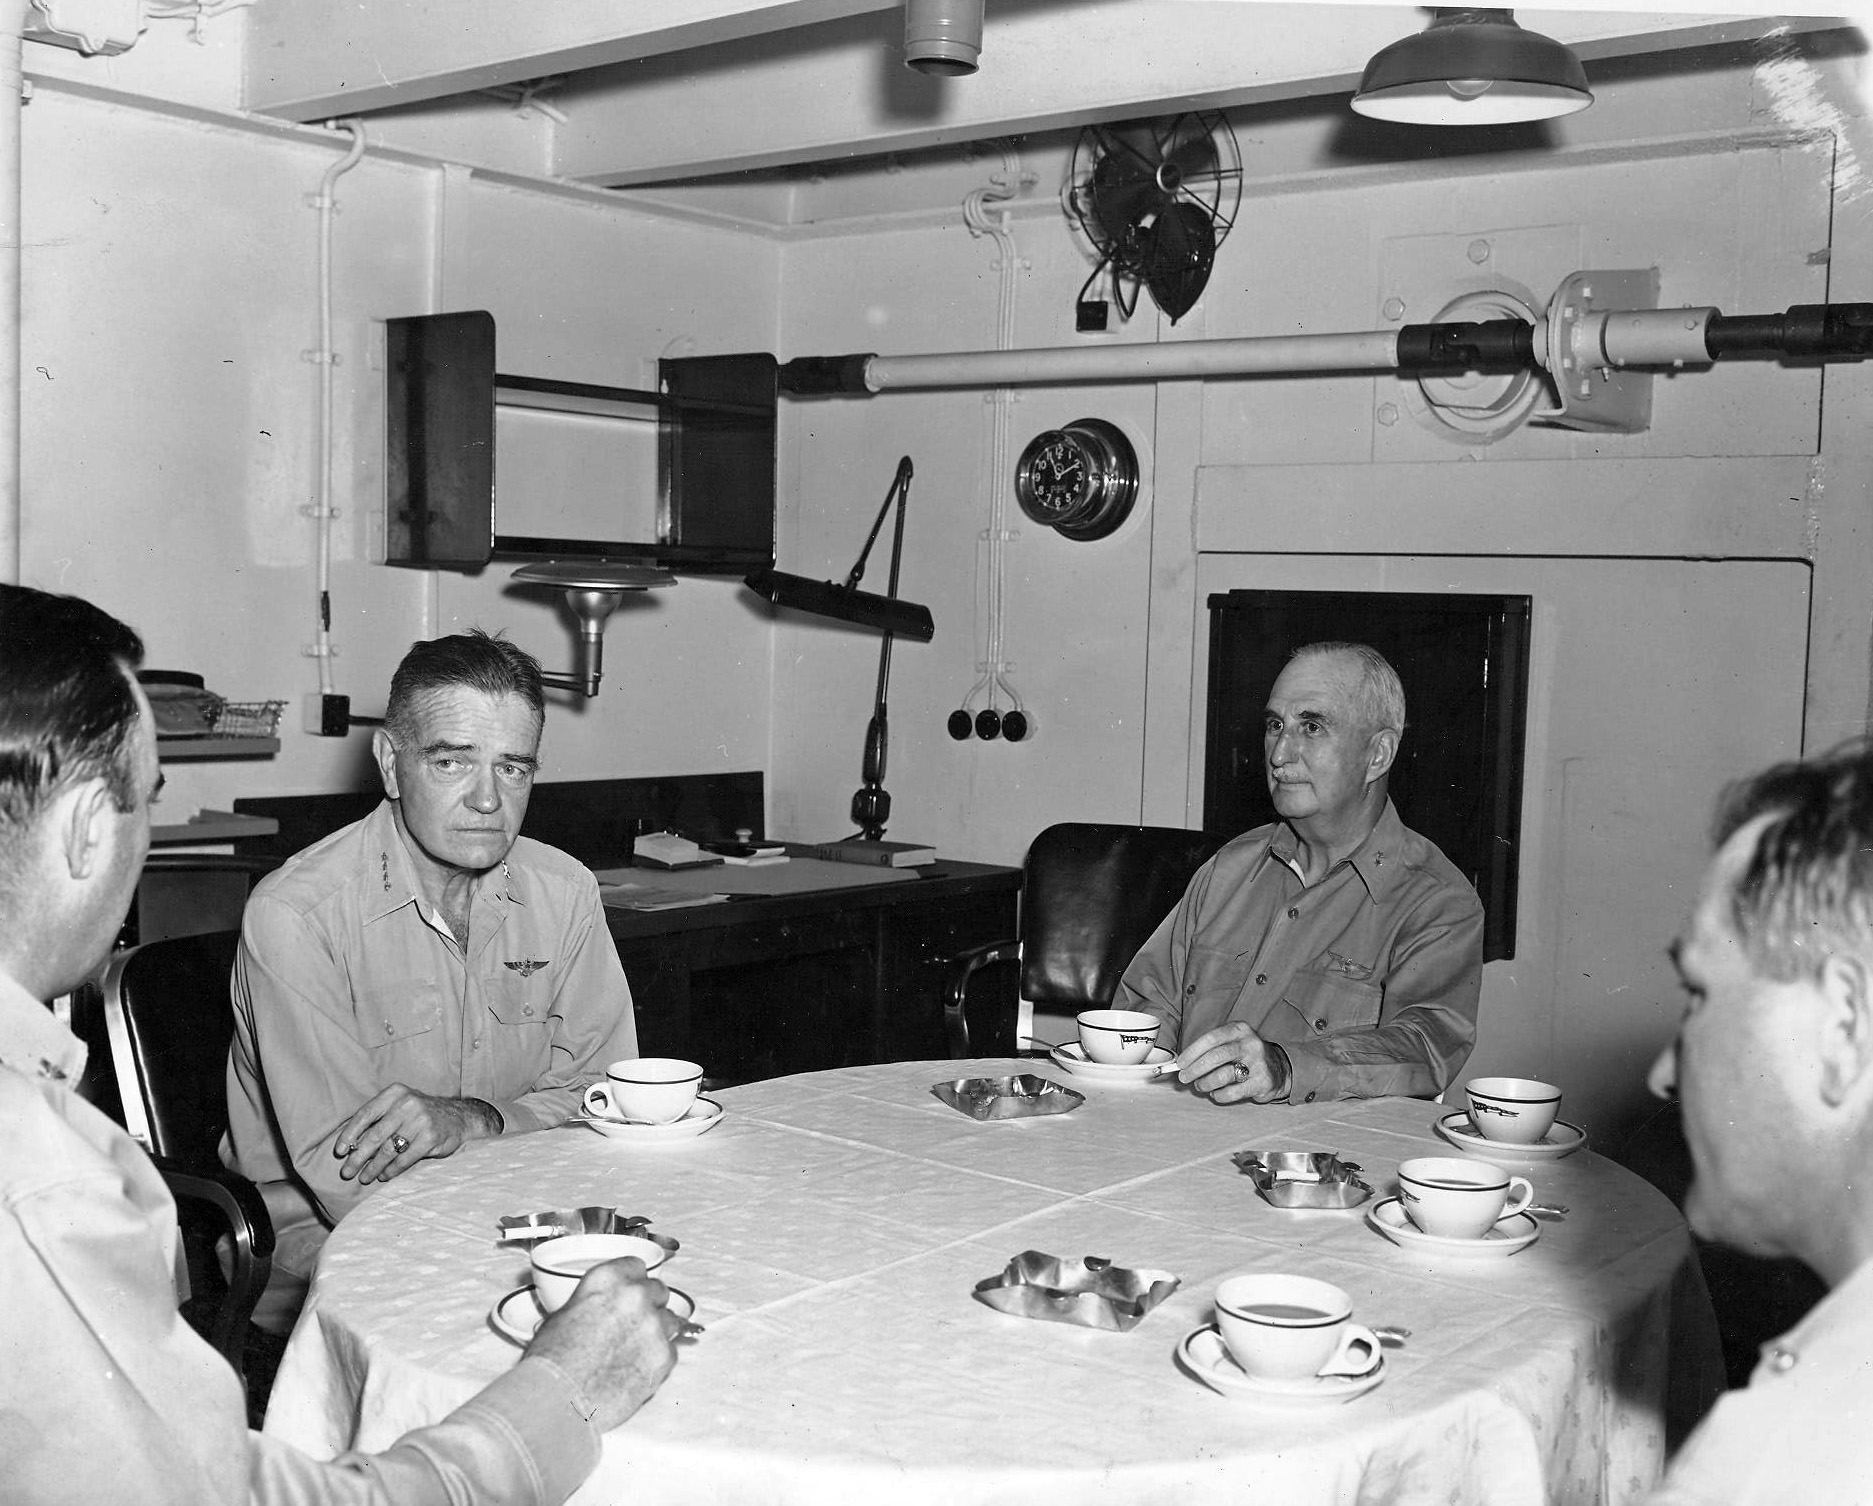 Admiral Halsey, Rear Admiral Charles P Mason, Captain Austin K Doyle, and an unidentified captain in the captain's cabin on USS Nassau at Nouméa, New Caledonia, 23 Dec 1942